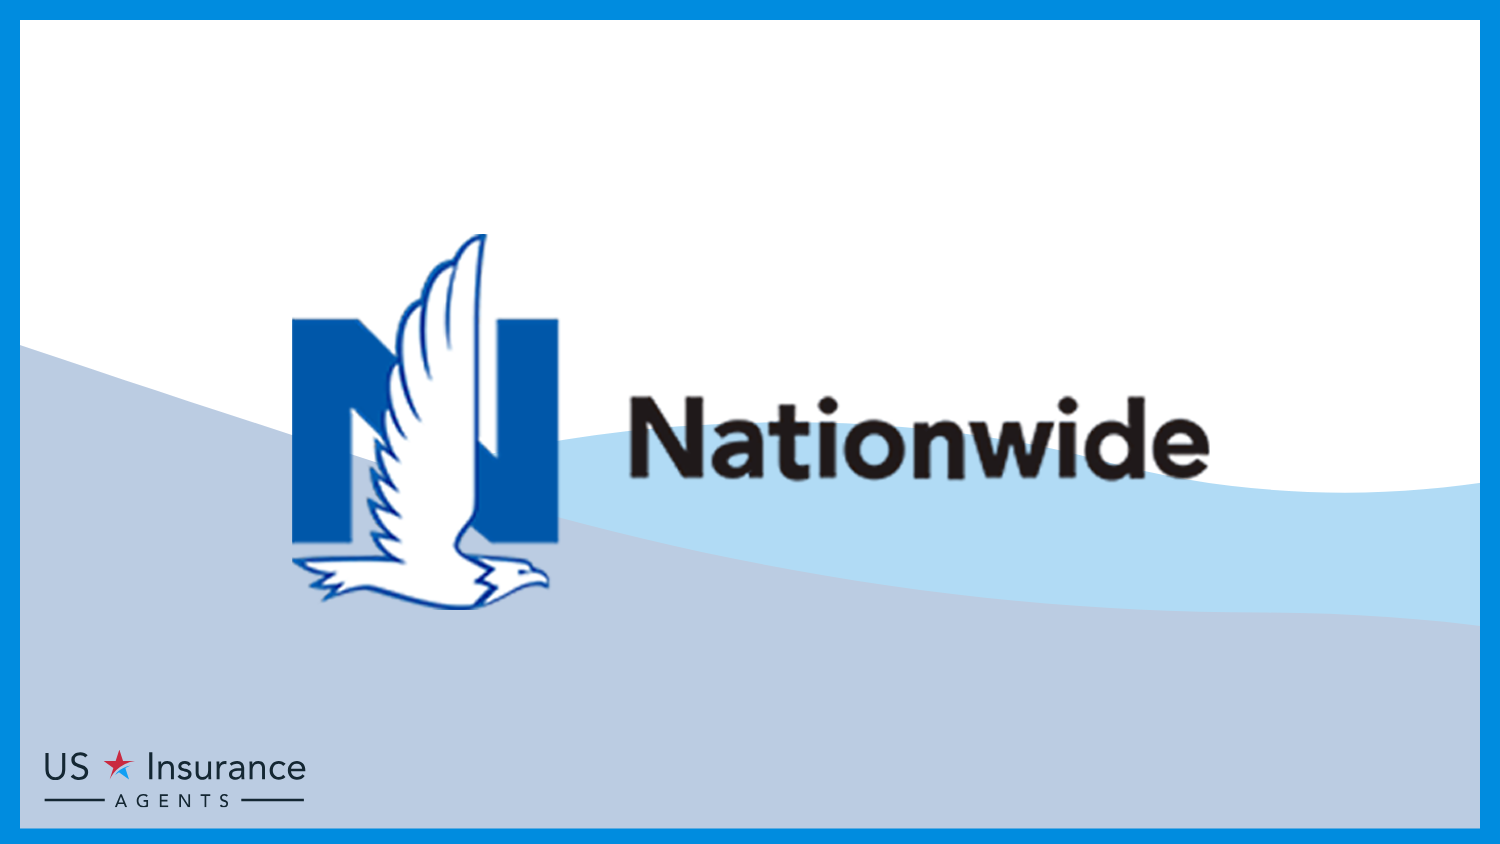 Nationwide: Best Business Insurance for Residential Builders